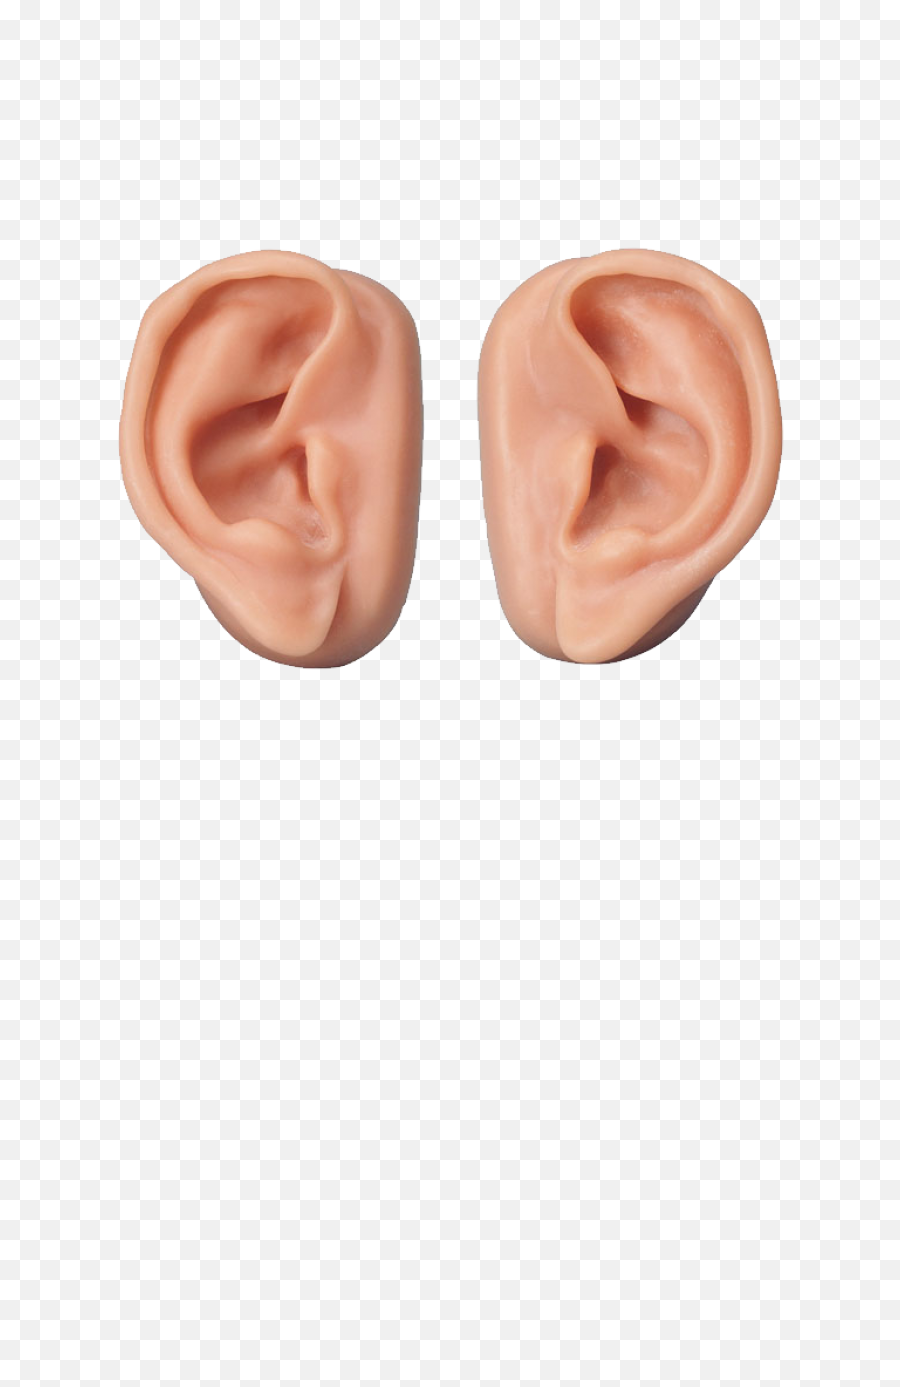 Download Ear Png Image For Free - Transparent Background Ears Png,Ear Png